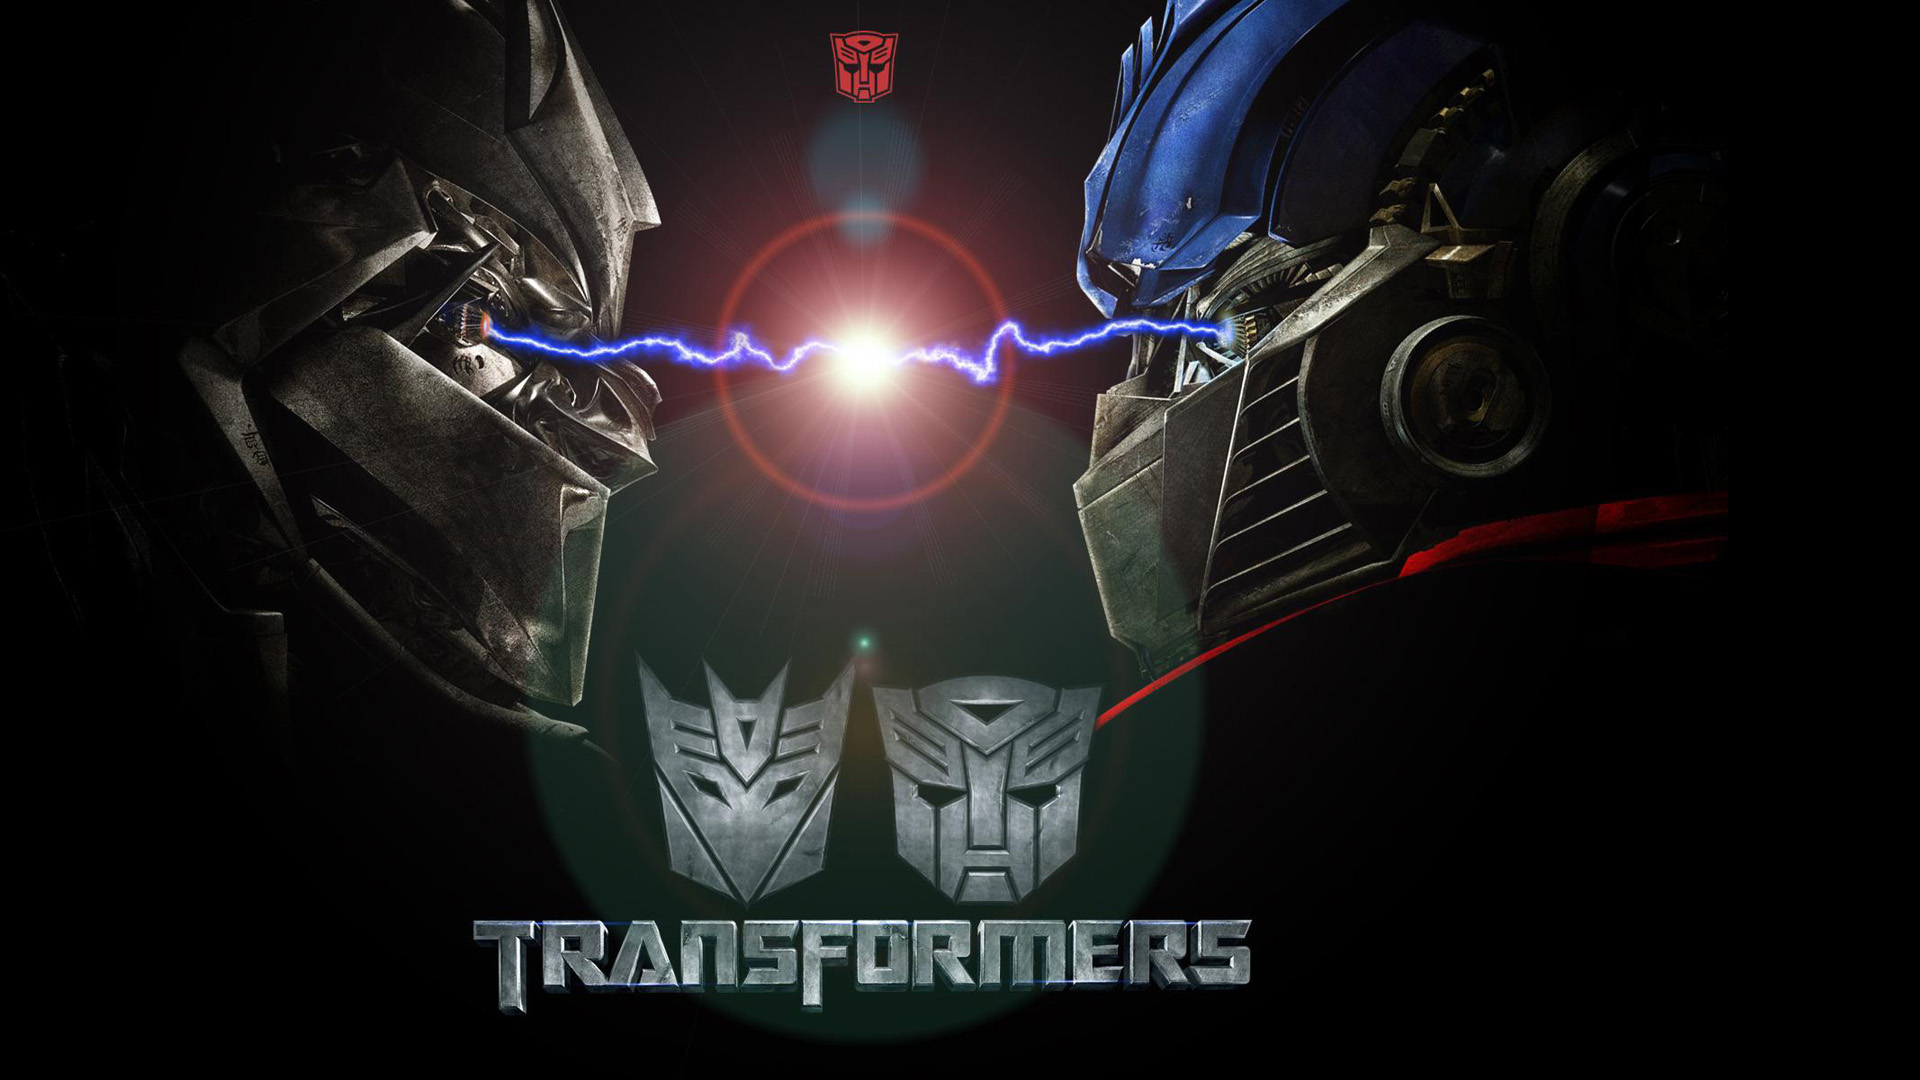  other sizes pixels transformers prime wallpaper collection 1920x1080